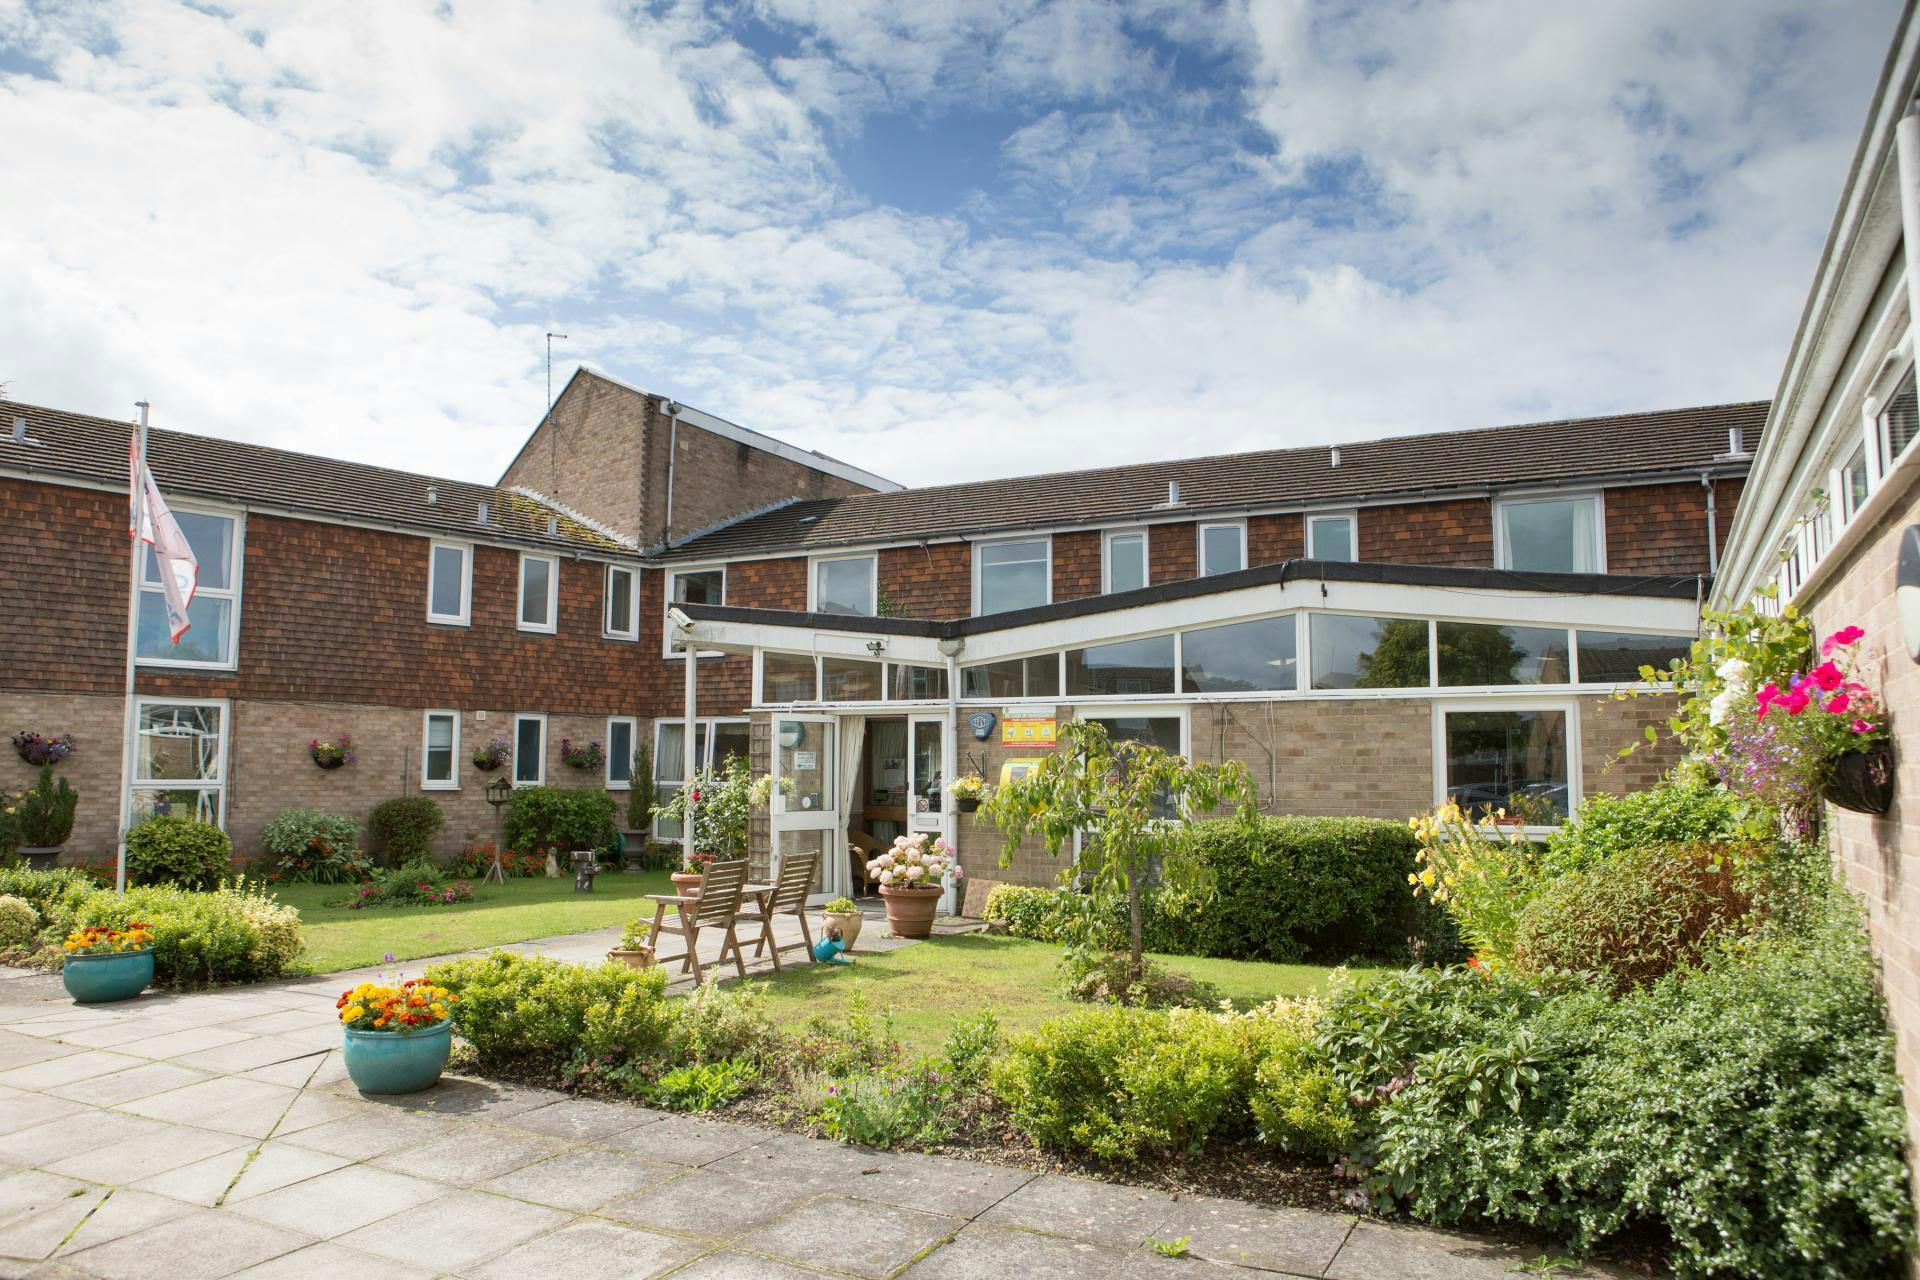 Exterior of Ridgeway House Care Home in Swindon,Wiltshire